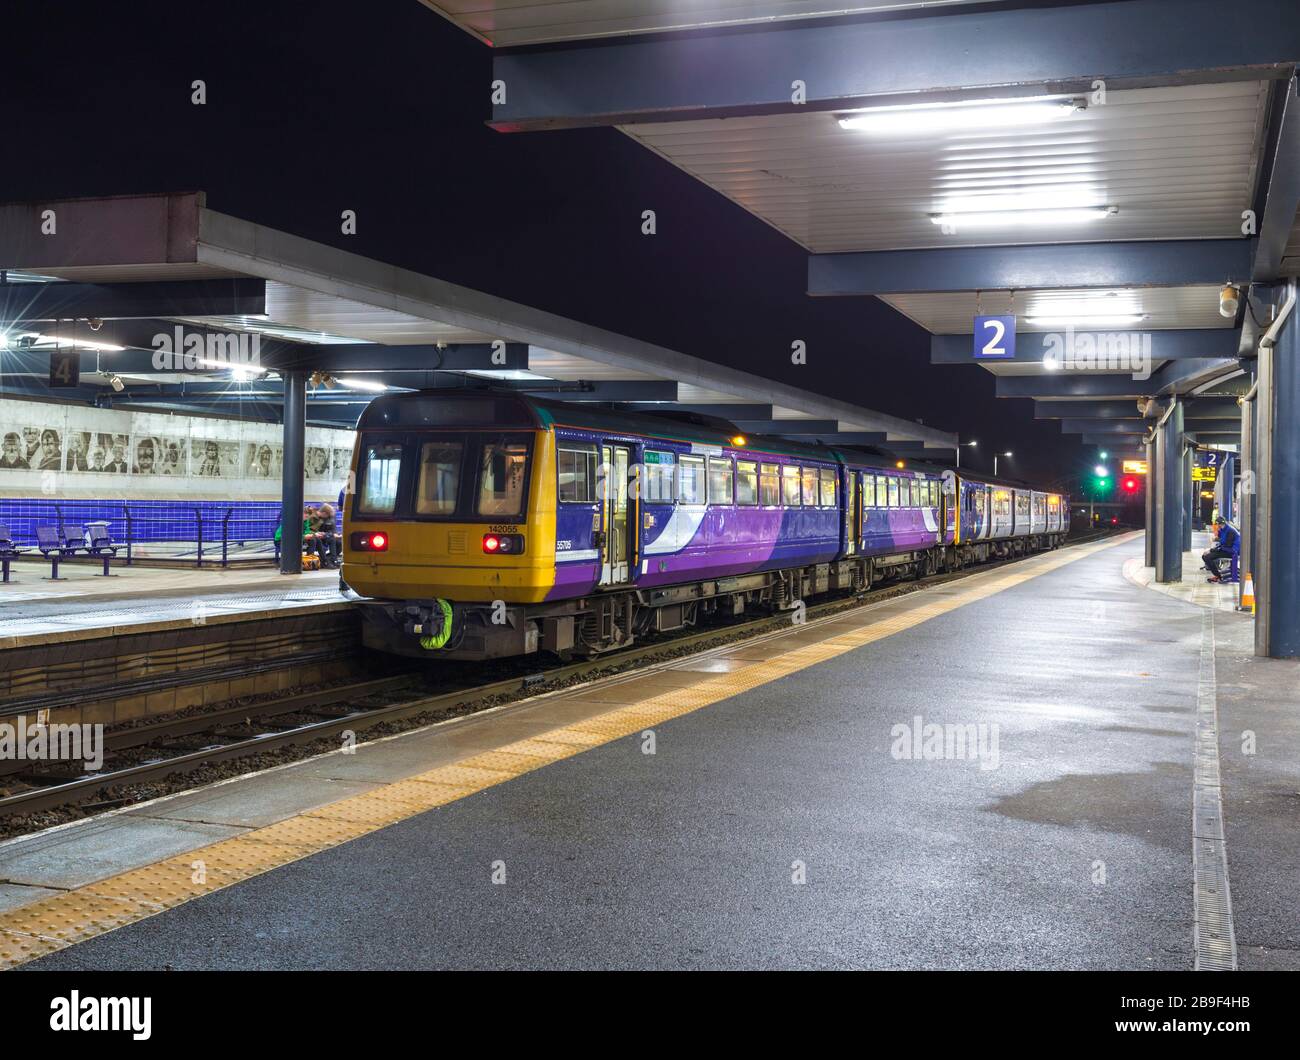 Northern Rail class 142 pacer train 142055 at Blackburn railway station on the rear of a Clitheroe to Rochdale train Stock Photo